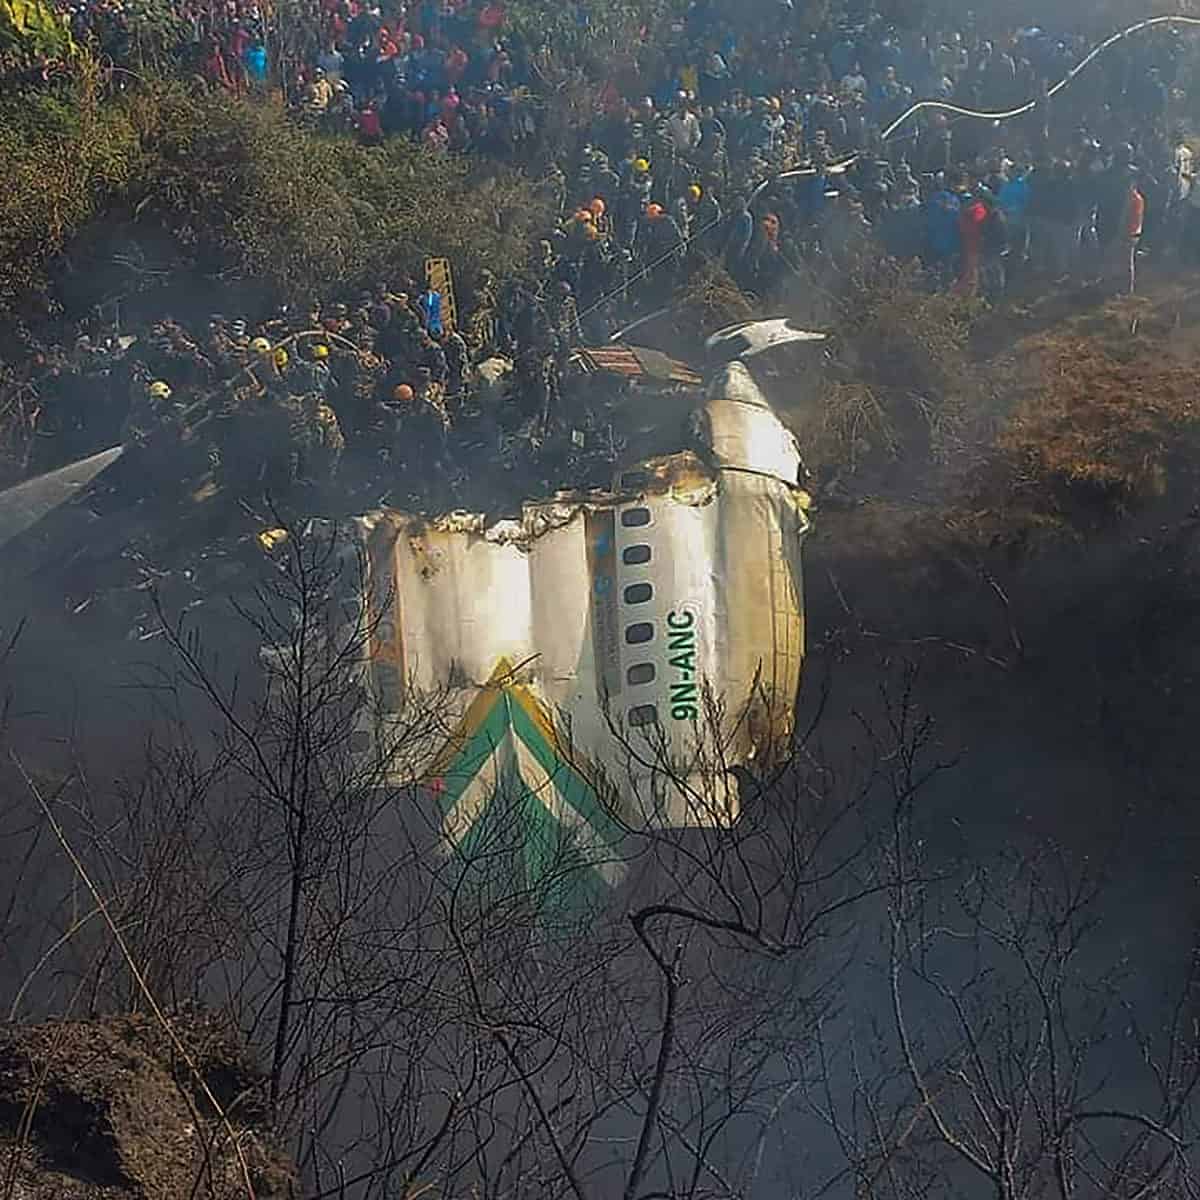 Nepal plane crash: Death toll rises to 71 as authorities handover victims' bodies to family members